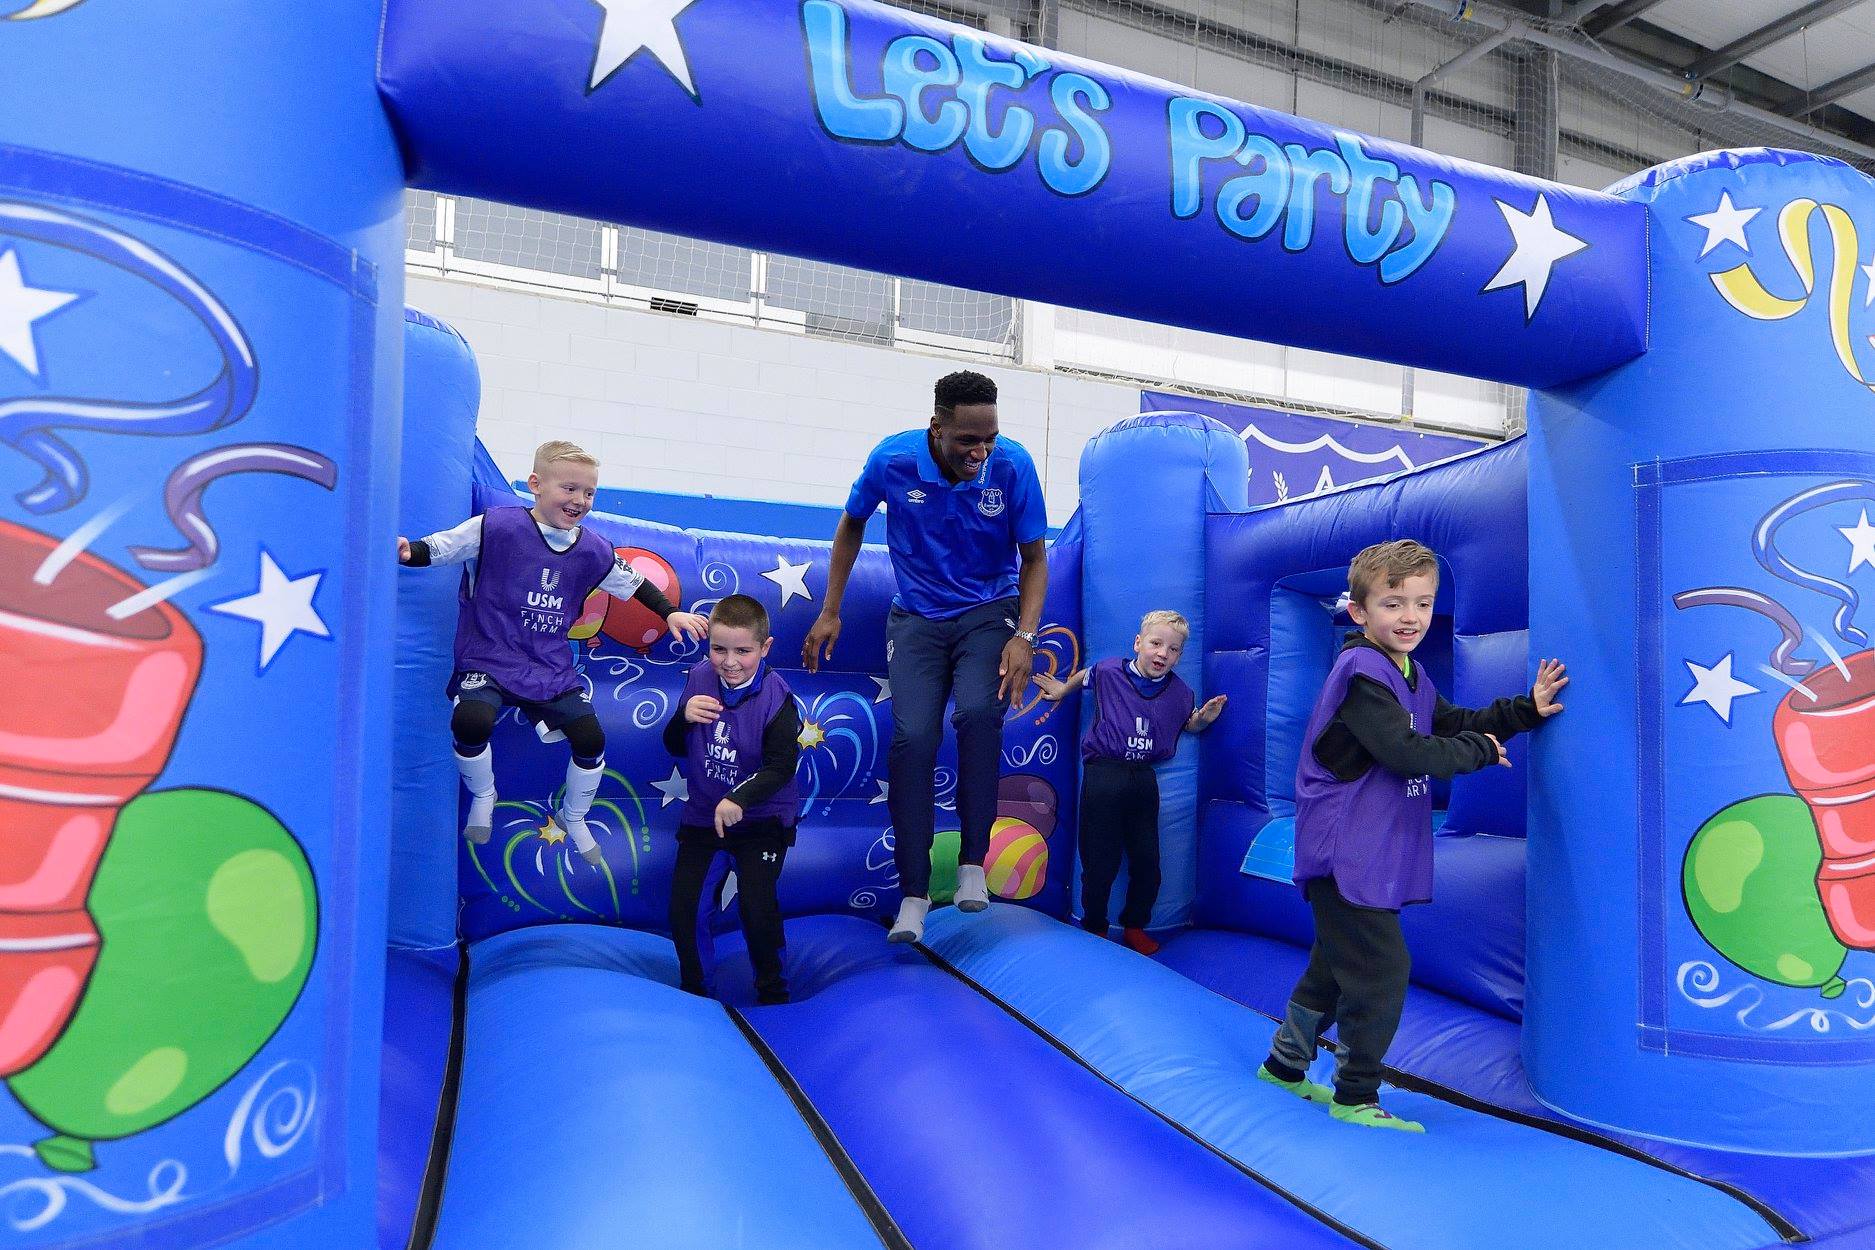 An image of an SJ's Leisure bouncy castle being used at an indoor event for Everton FC in Liverpool, Merseyside